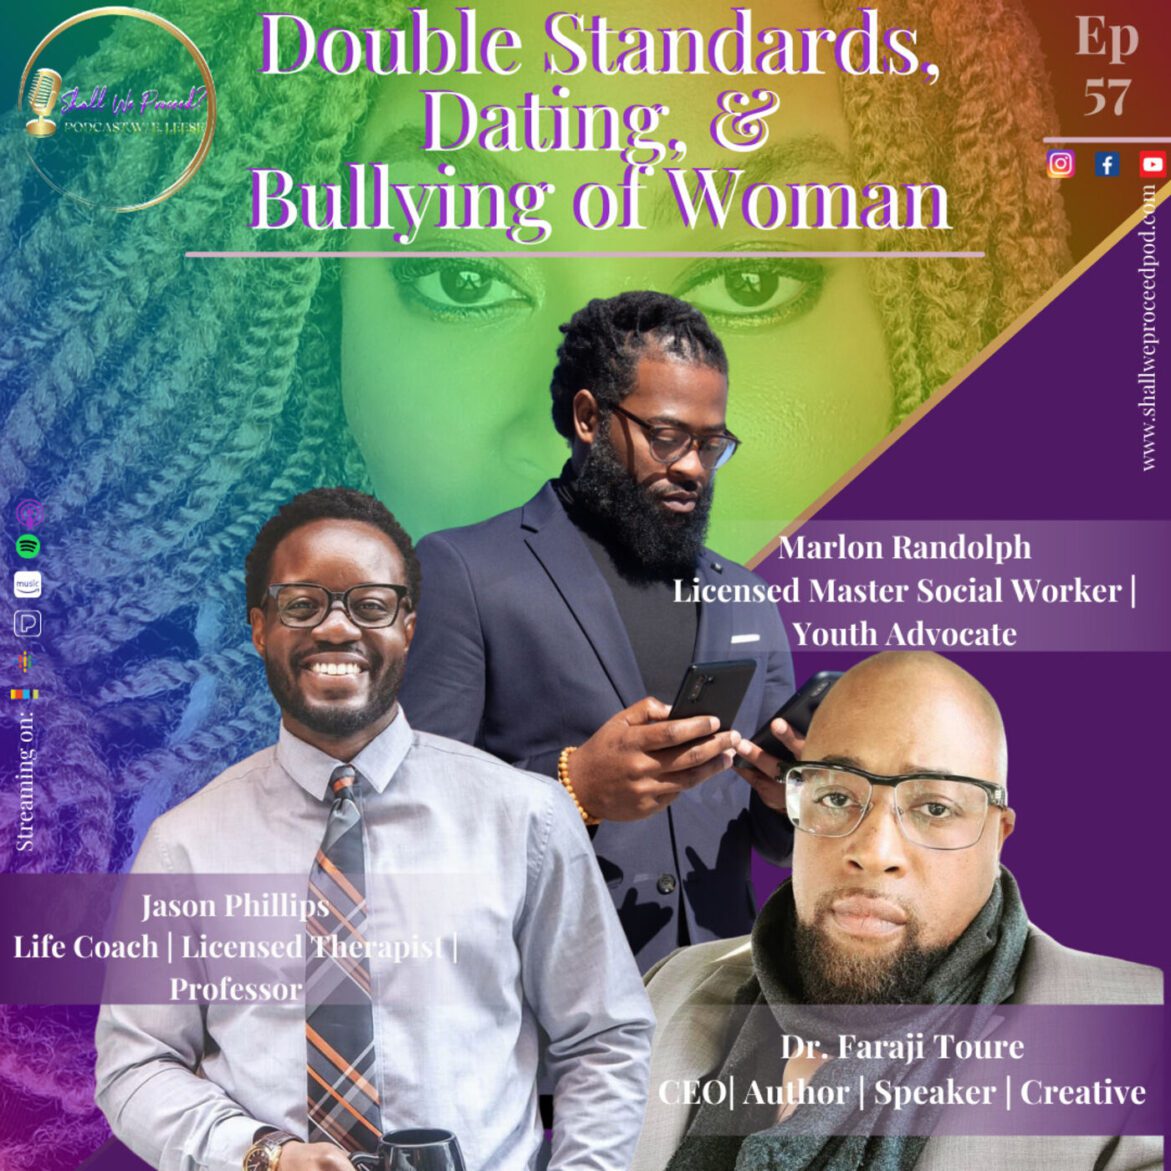 Black Podcasting - Double Standards & the Dating Woman w/ Jason Phillips, Marlon Randolph, and Dr. Faraji Toure